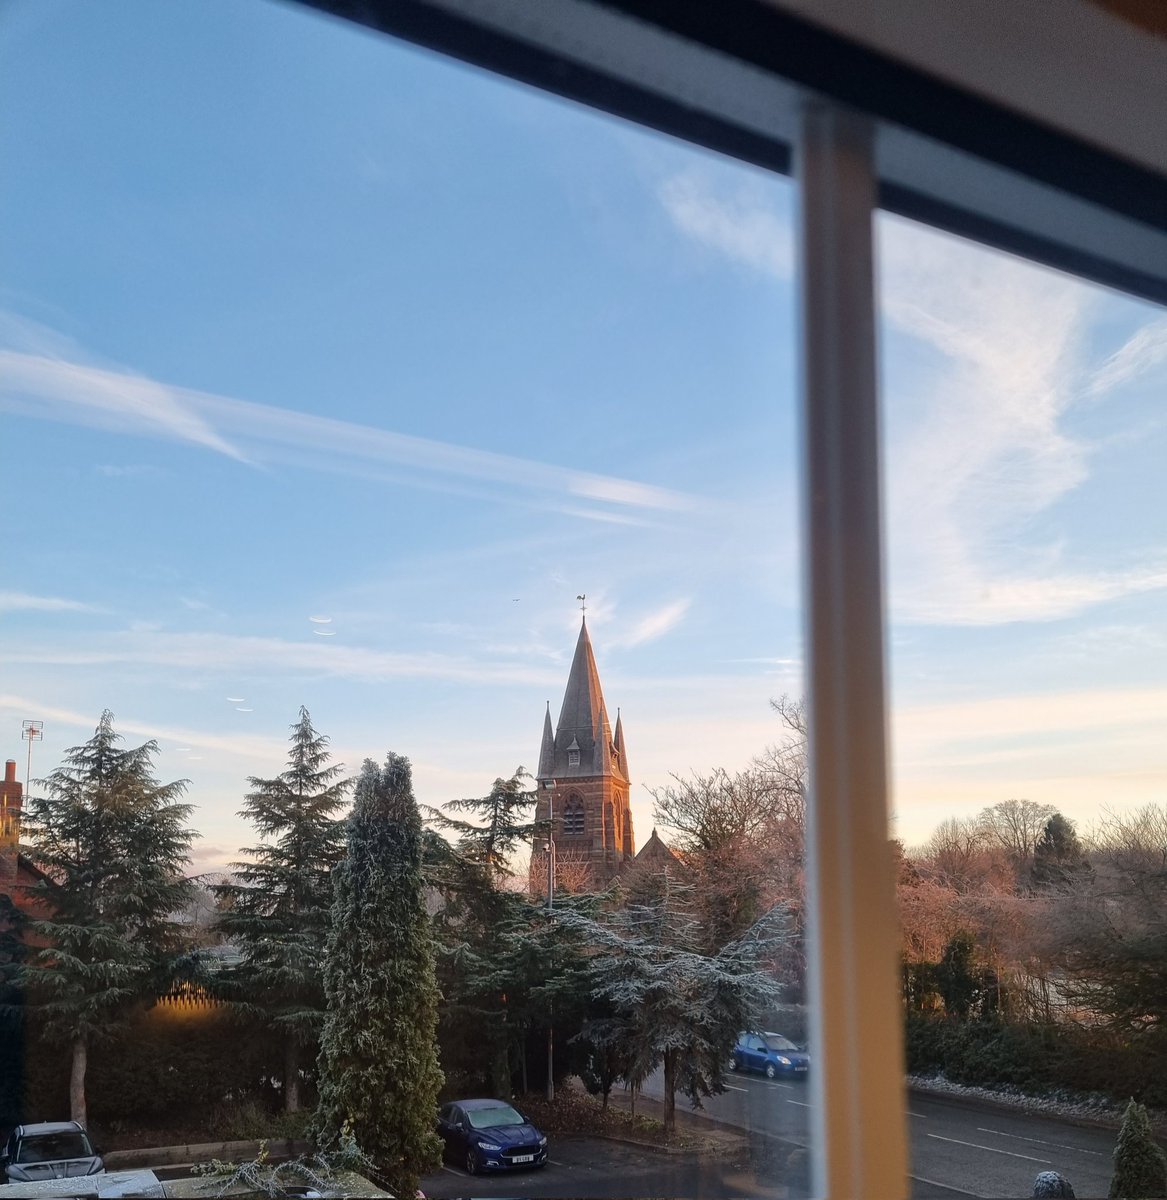 What a way to end a busy week here at @ndeducation Wrexham, a beautiful crisp December morning for a Cluster meeting. ❄

Its beginning to look a lot like Christmas 🎁🎅🎄

#education #teamwrexham #newdirections #cluster #christmas #grateful